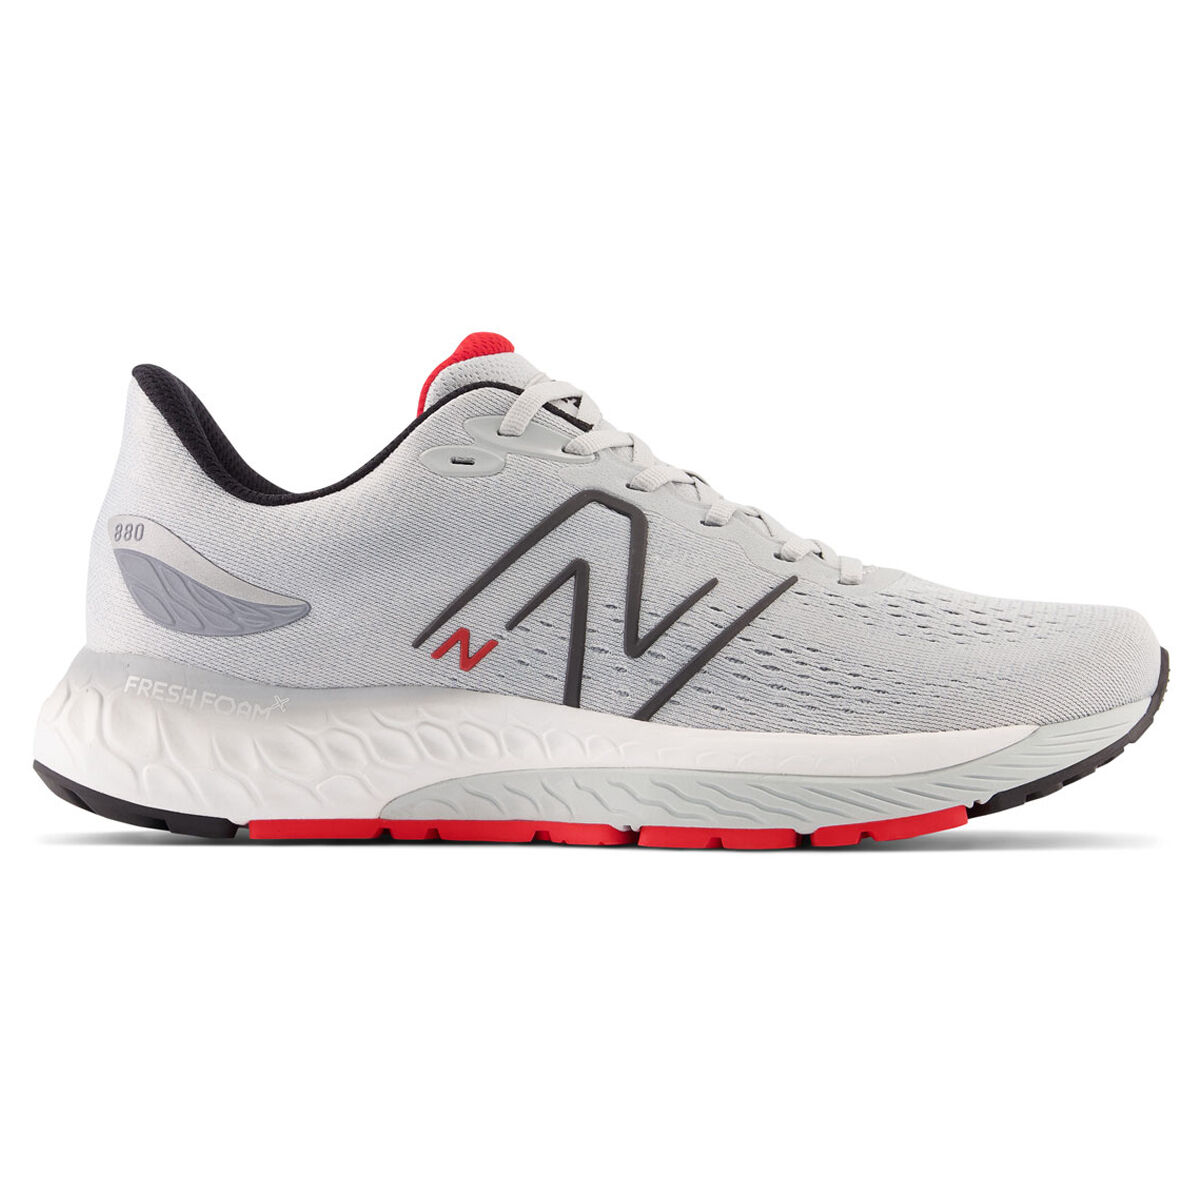 New Balance | Clothing & Accessories | rebel